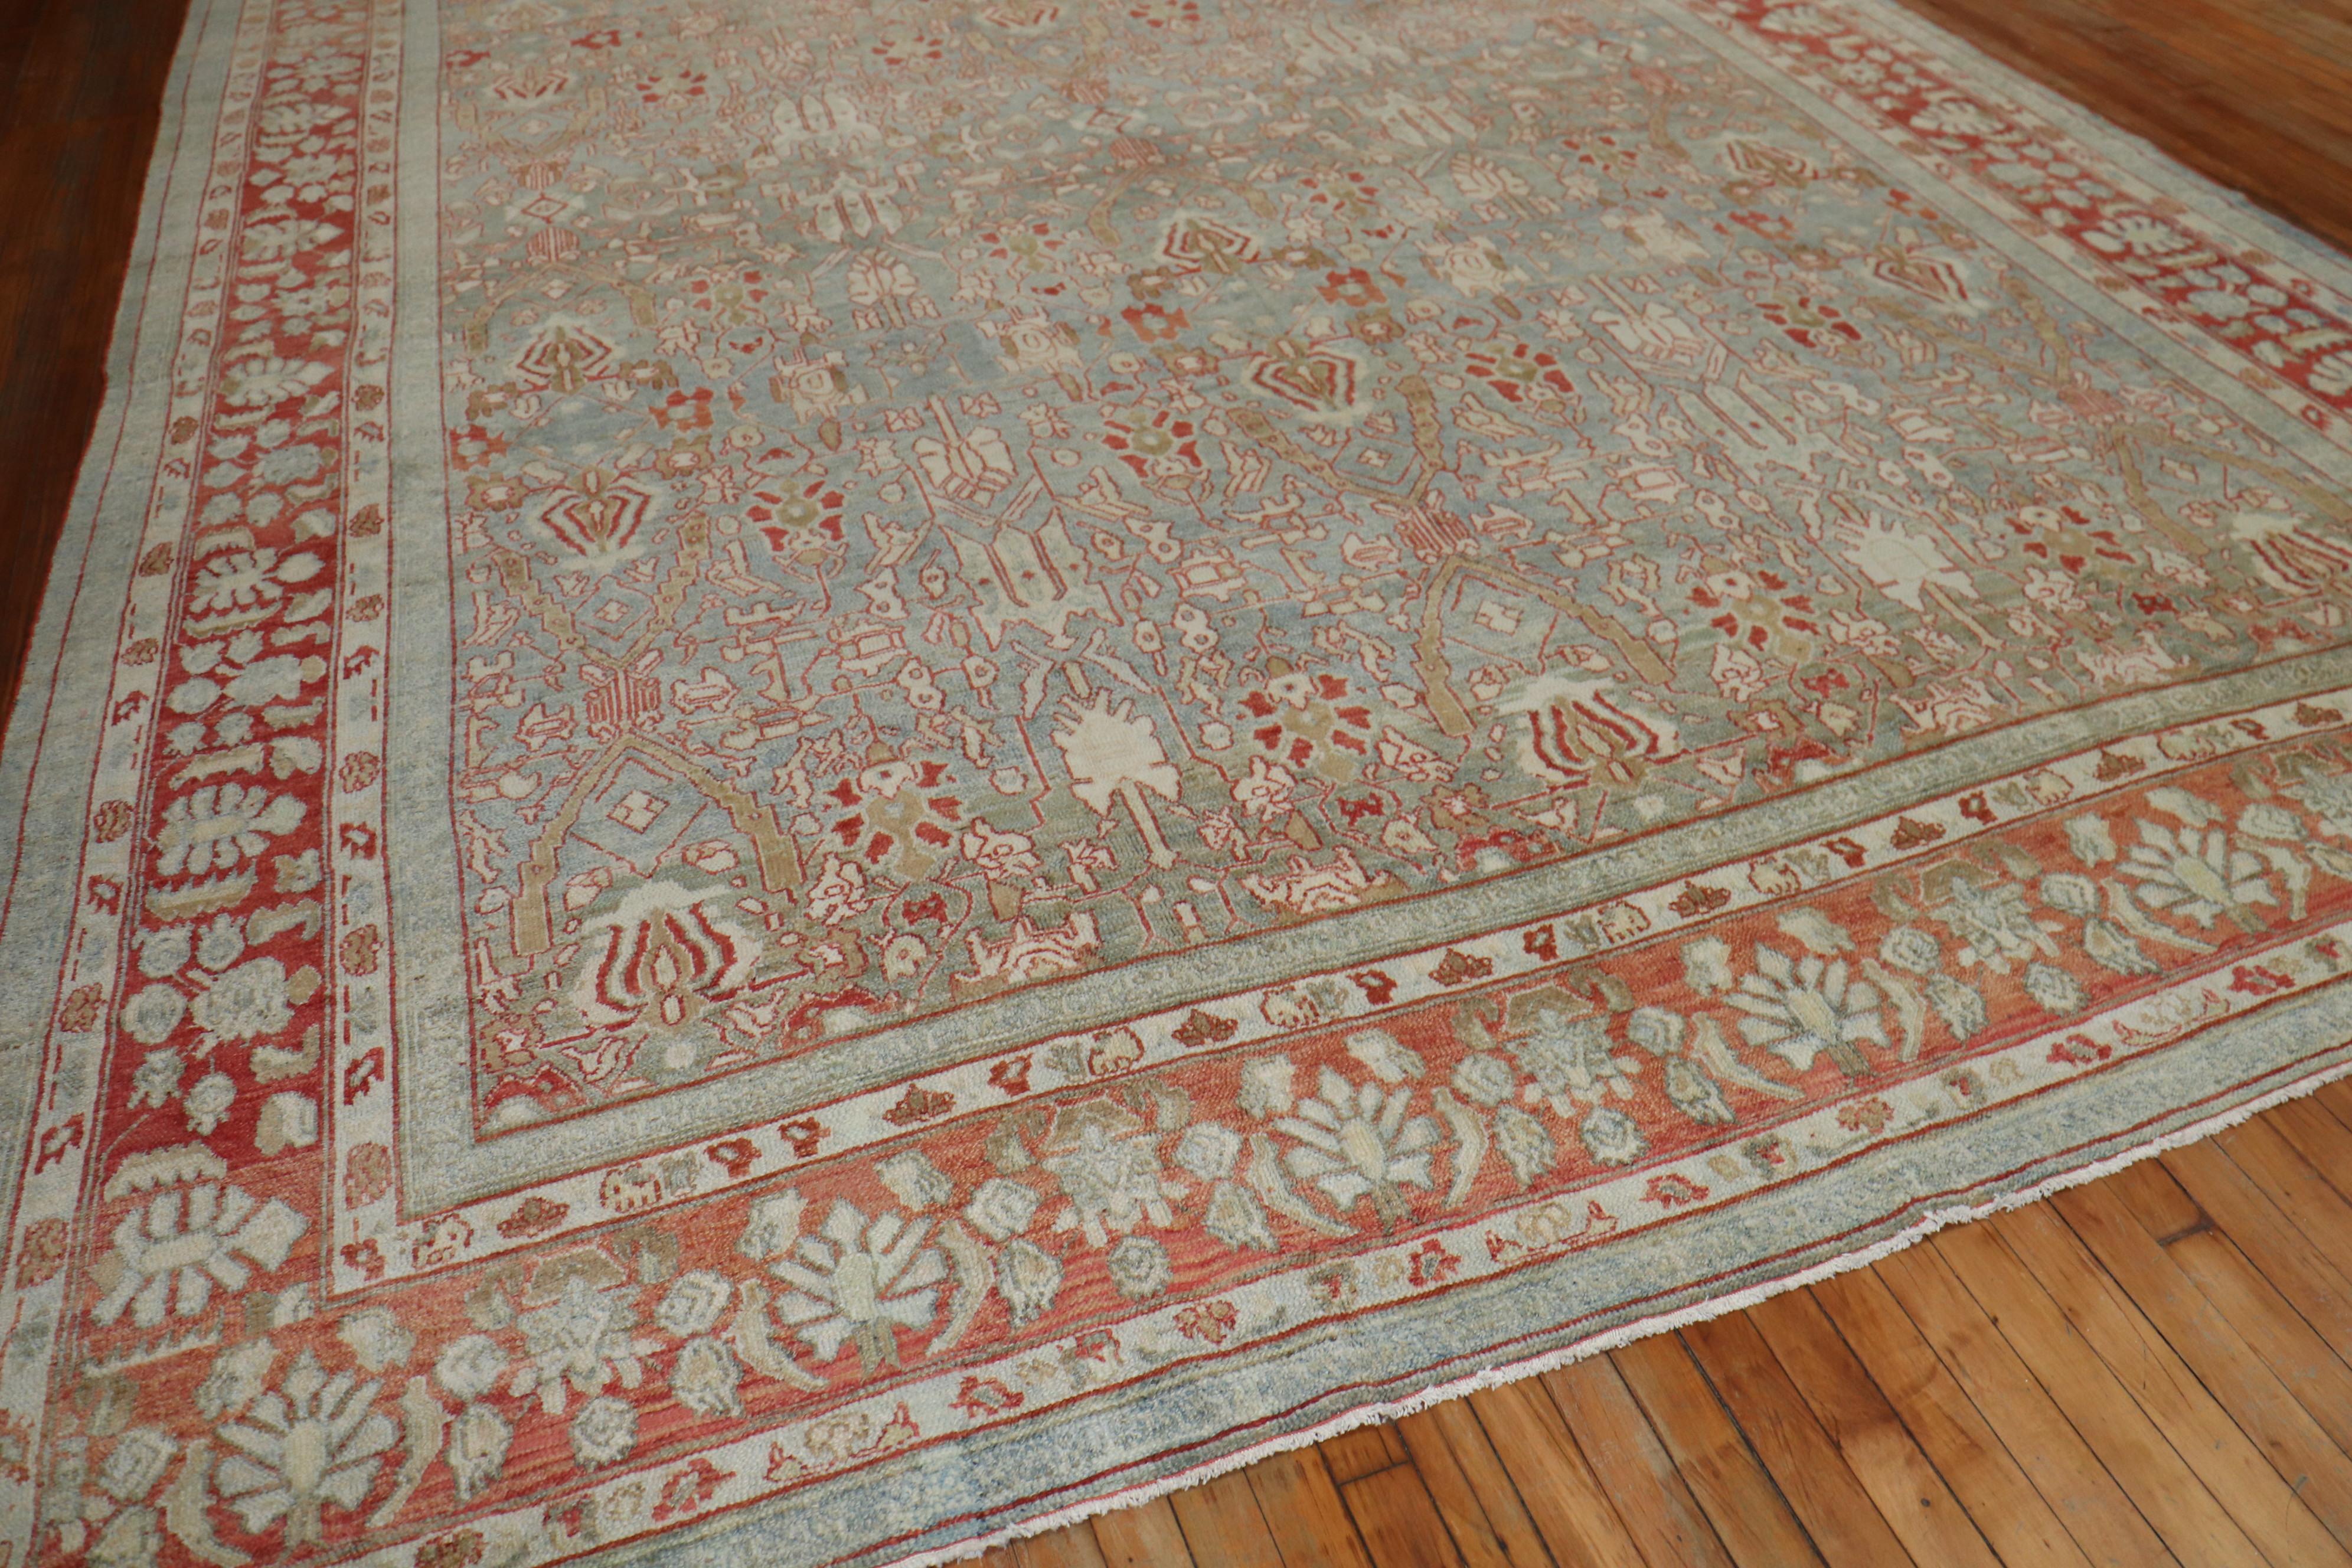 Hand-Knotted Decorative Oversize Gray Blue Persian Bibikabad Rug, Early 20th Century For Sale